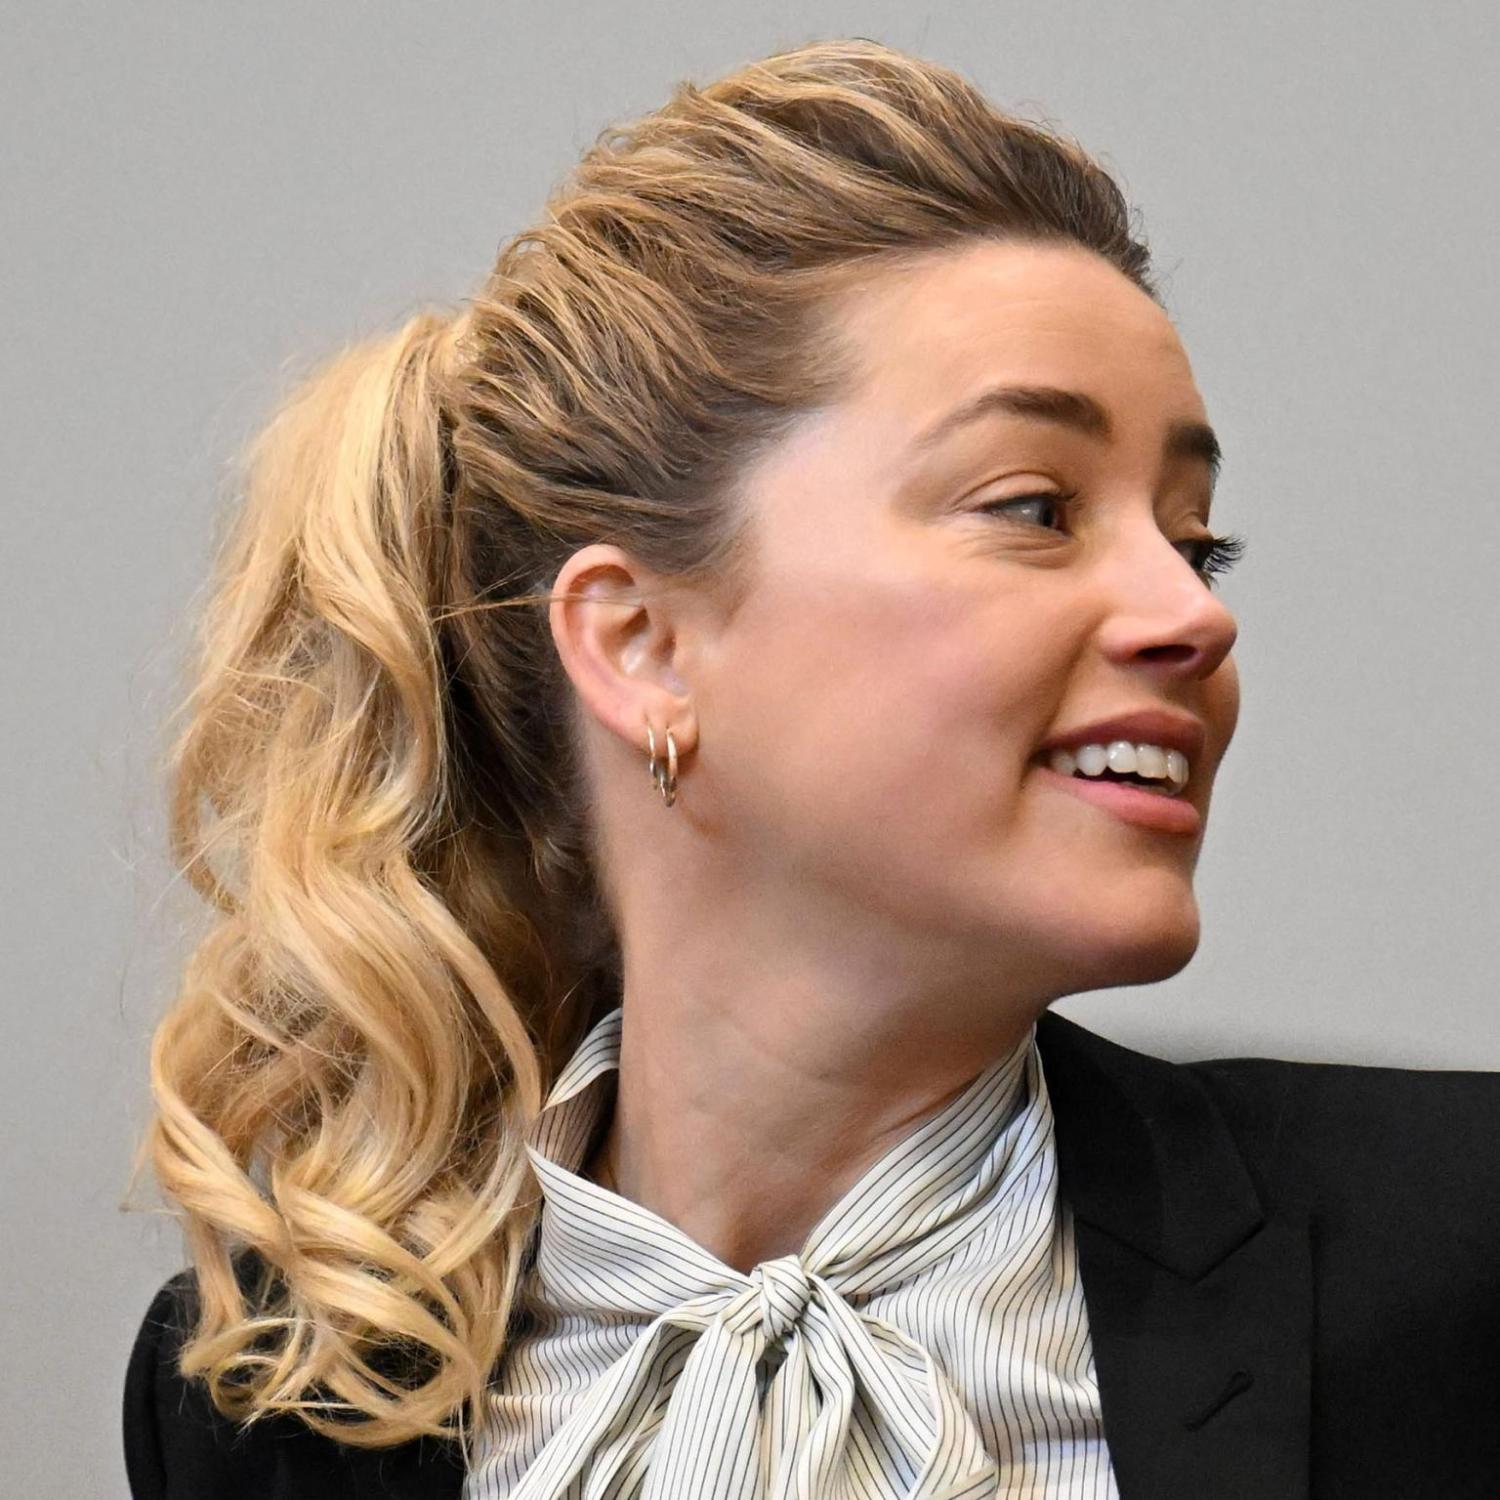 Amber Heard Is Accused Of Copying Johnny Depp's Courtroom Outfits